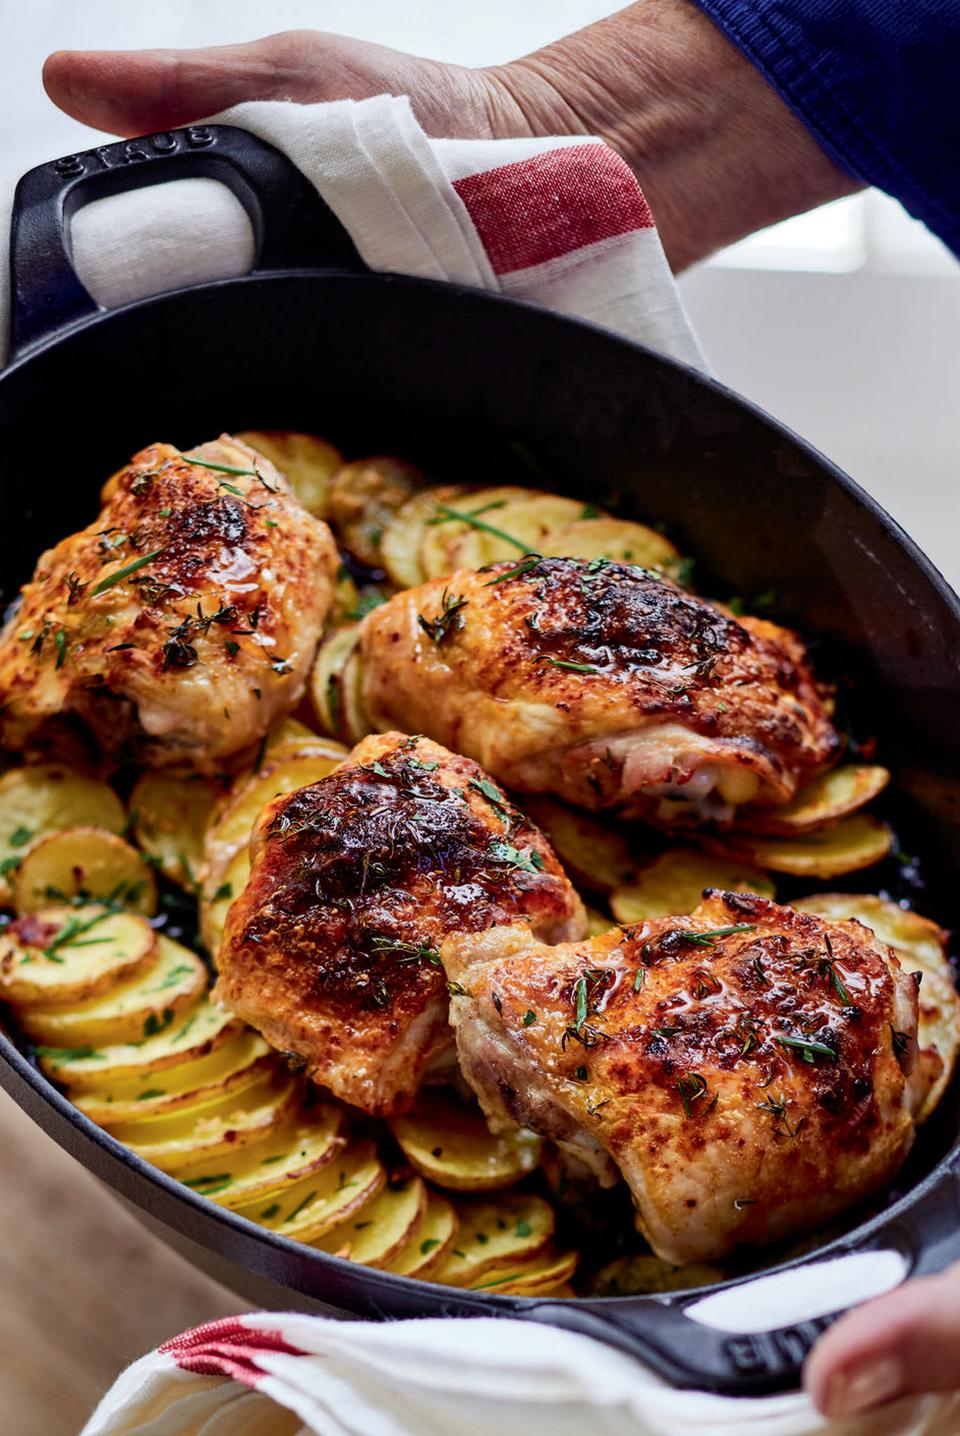 Skillet-Roasted Chicken and Potatoes